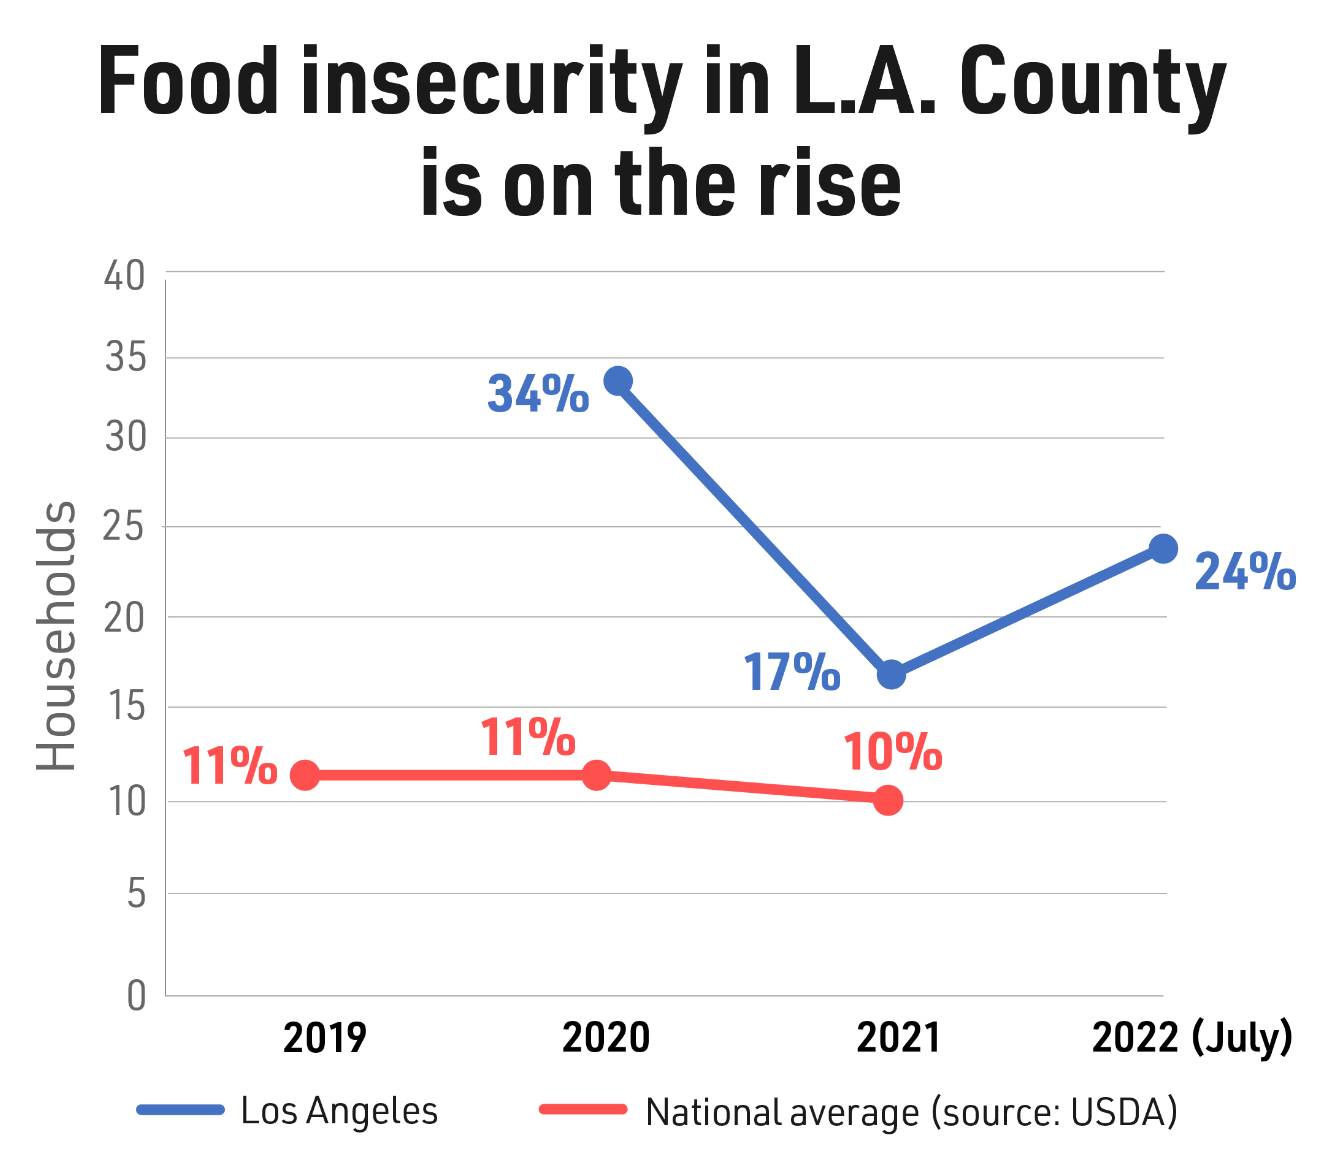 Food insecurity in LA County is on the rise graph showing an increase from 17% in 2021 to 24% in 2022.